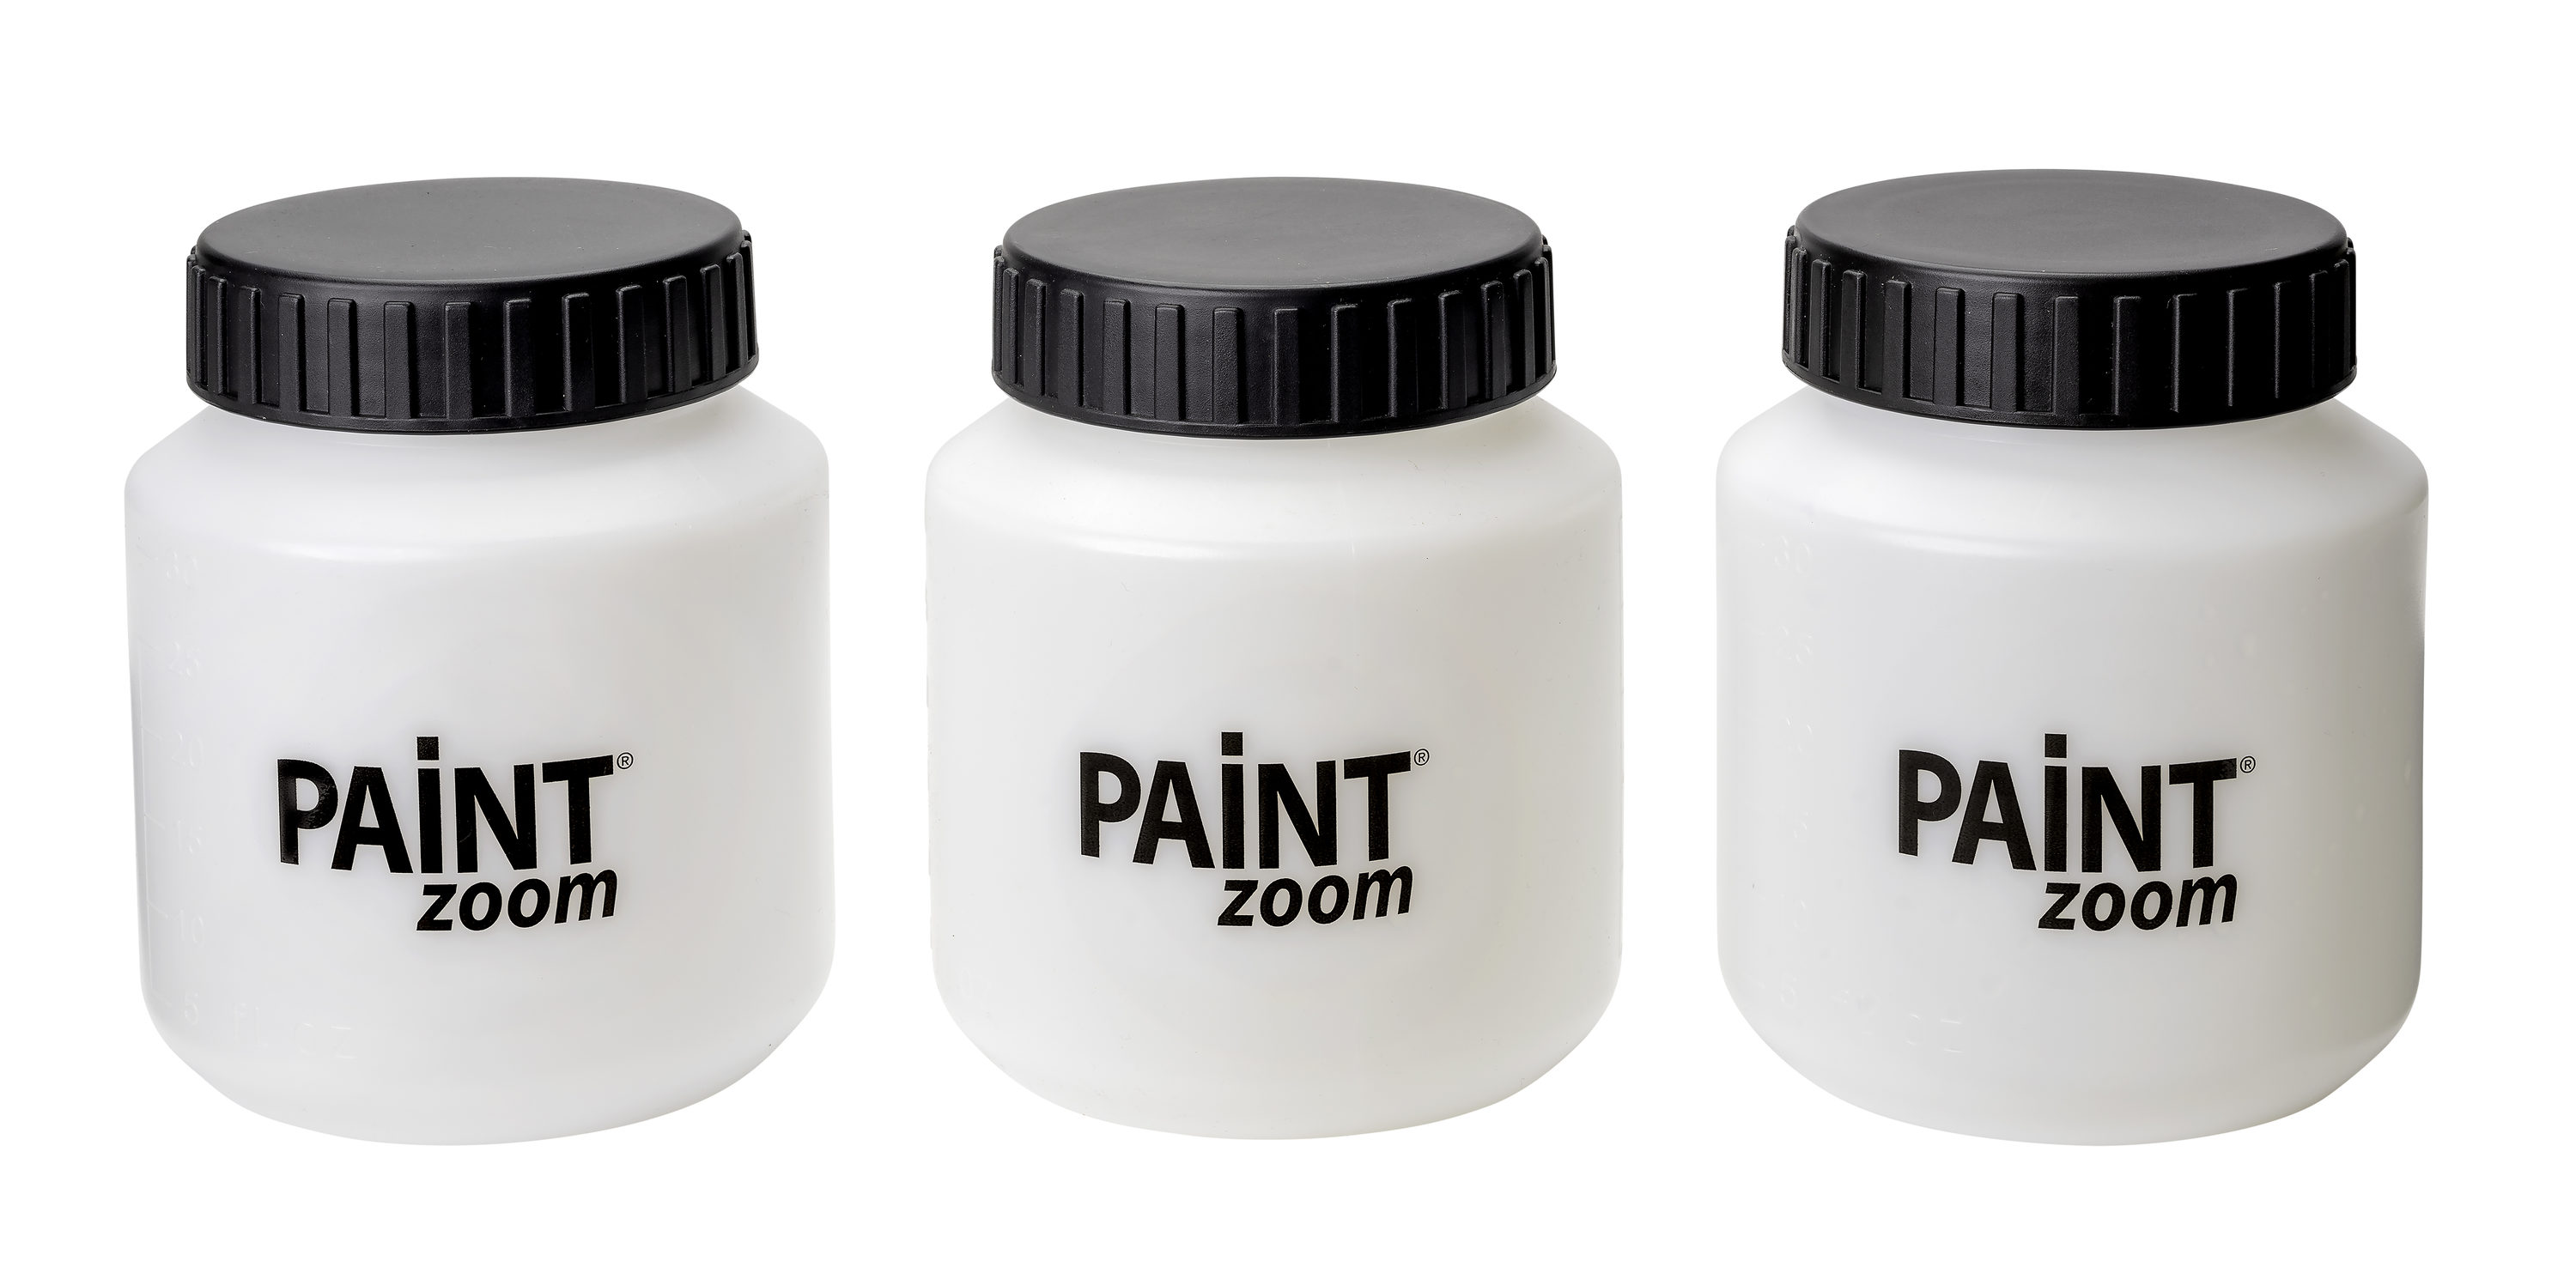 30 Pcs Small Paint Containers with Lids Acrylic Mini Box Plastic Cans